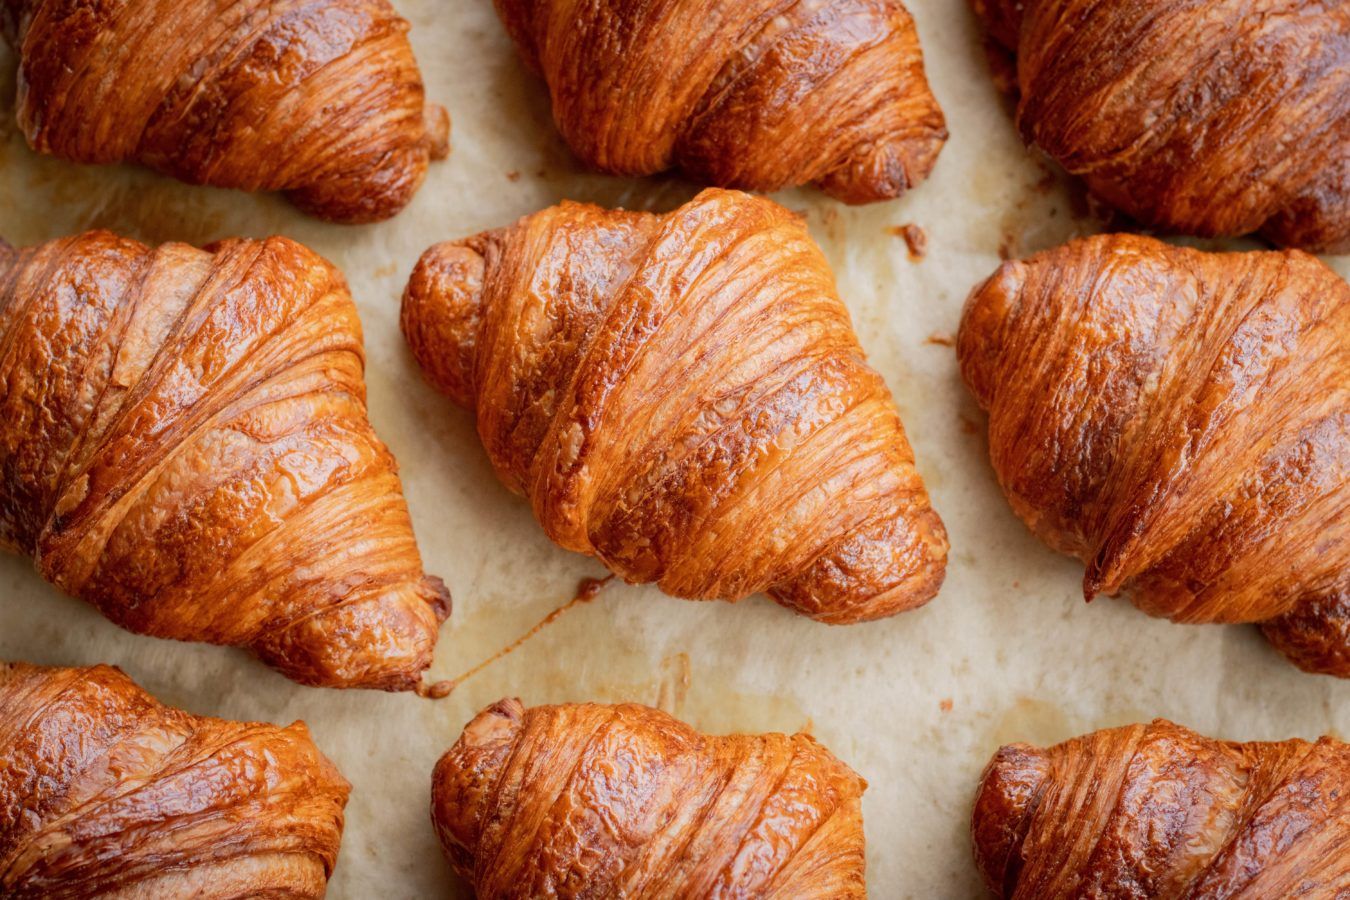 Where to Find the Most Exquisite Croissants in Bangkok